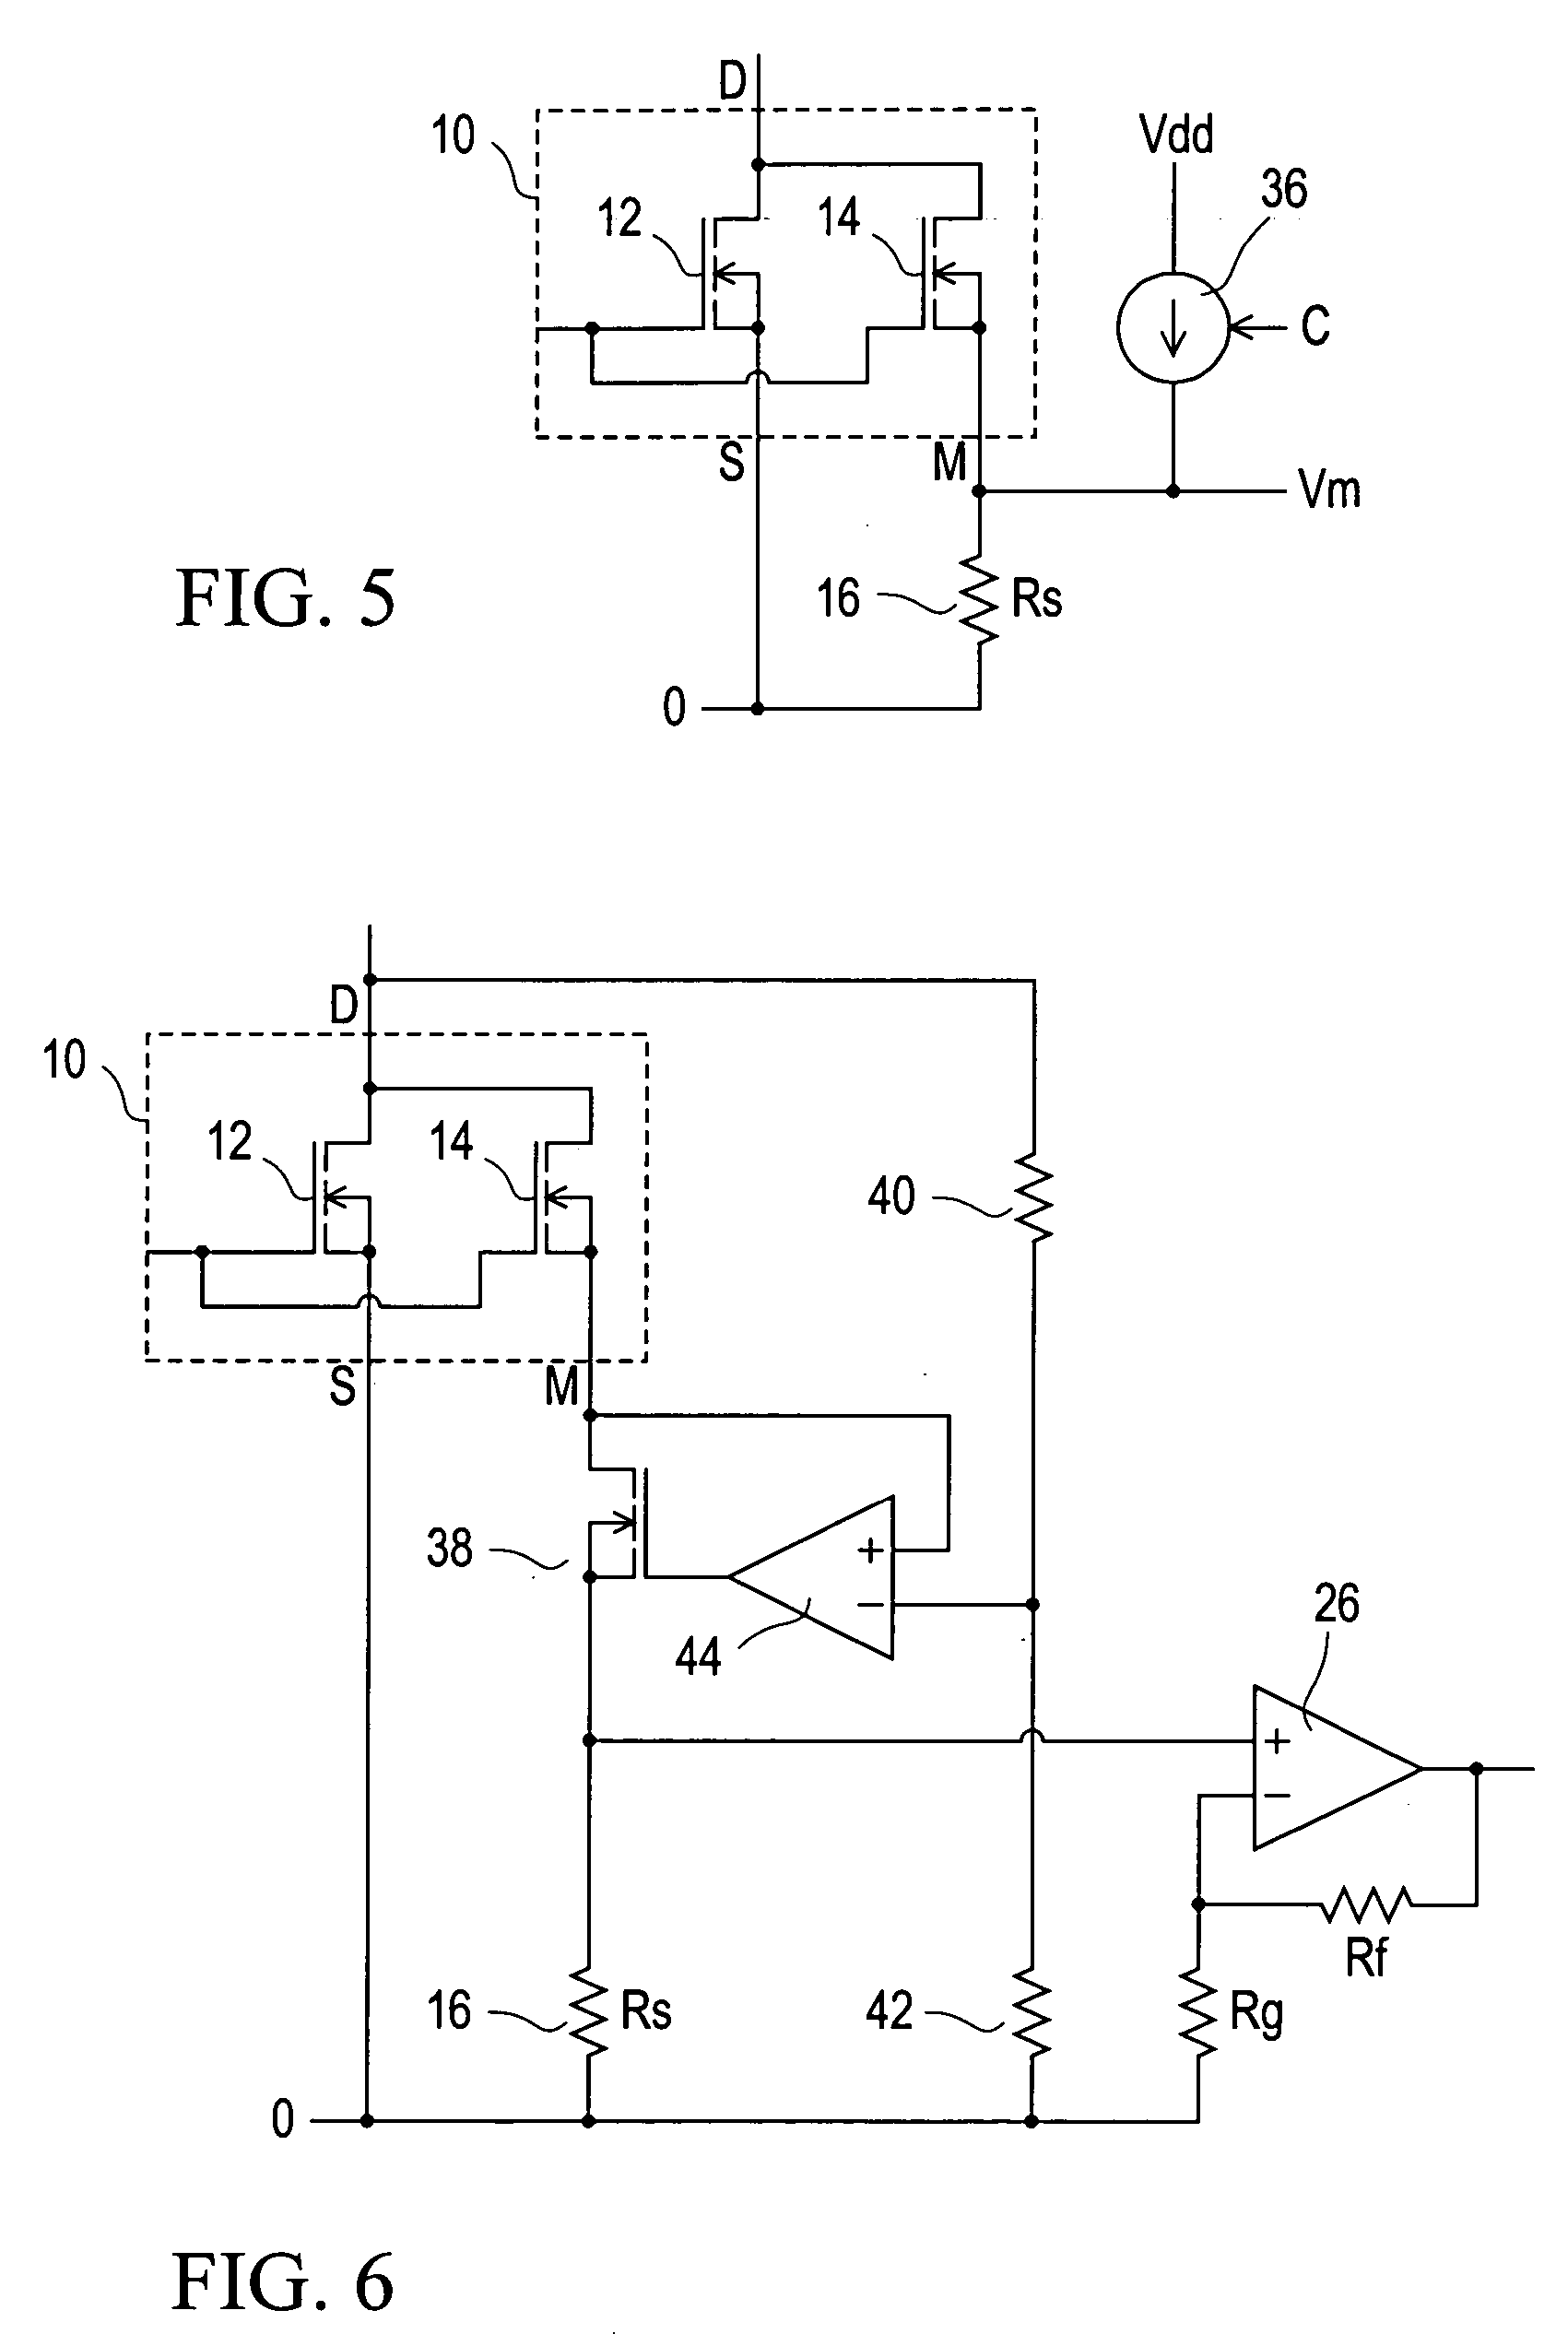 Current sensing for power MOSFETs